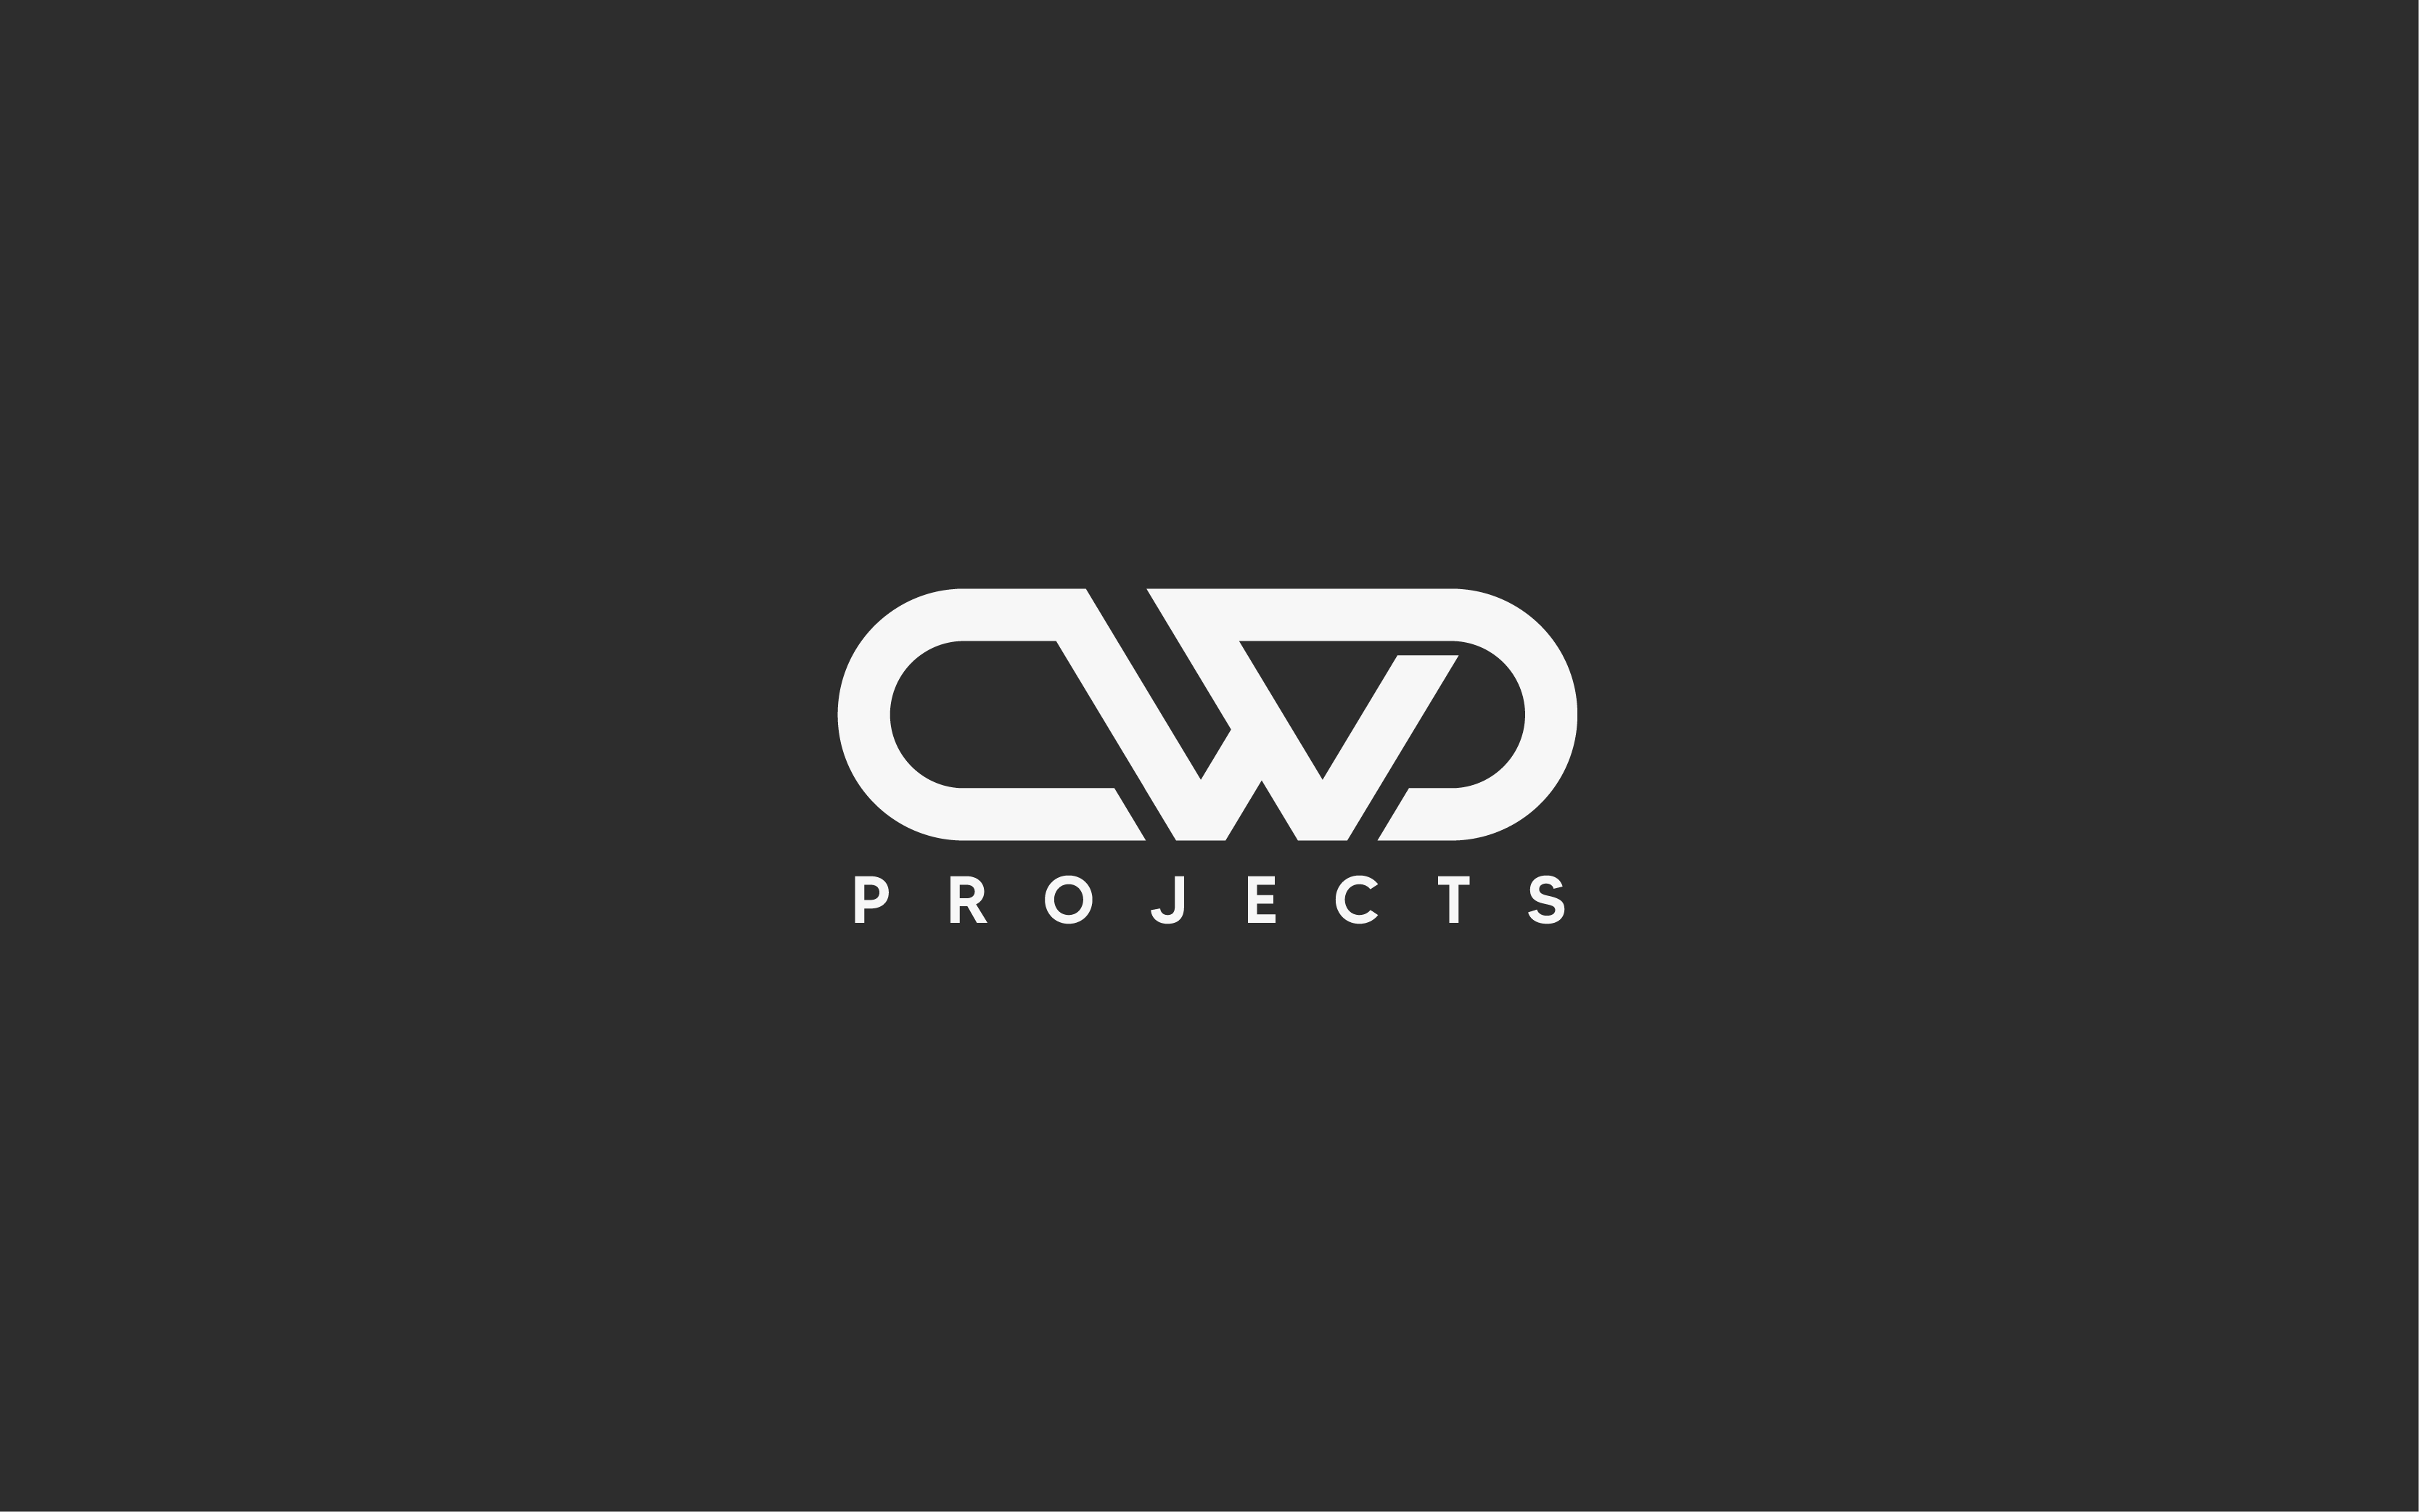 Cover Image for CWD Projects Reopens with Redesigned Website and Brand New Logo